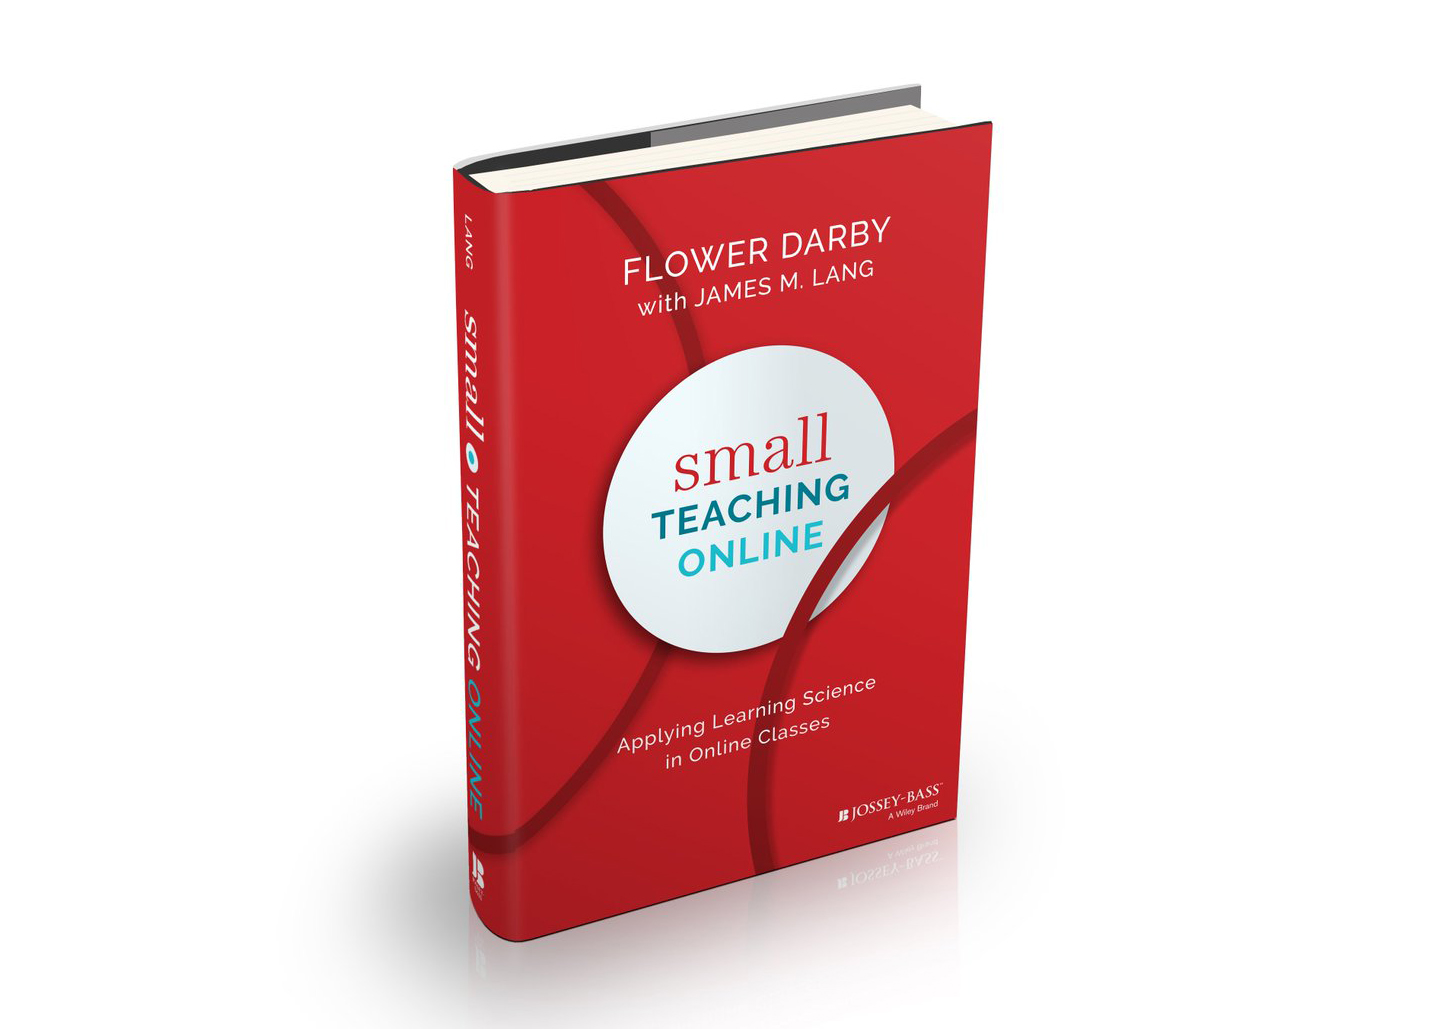 Small Teaching Online: Applying Learning Science in Online Classes by Flower Darby with James M. Lang